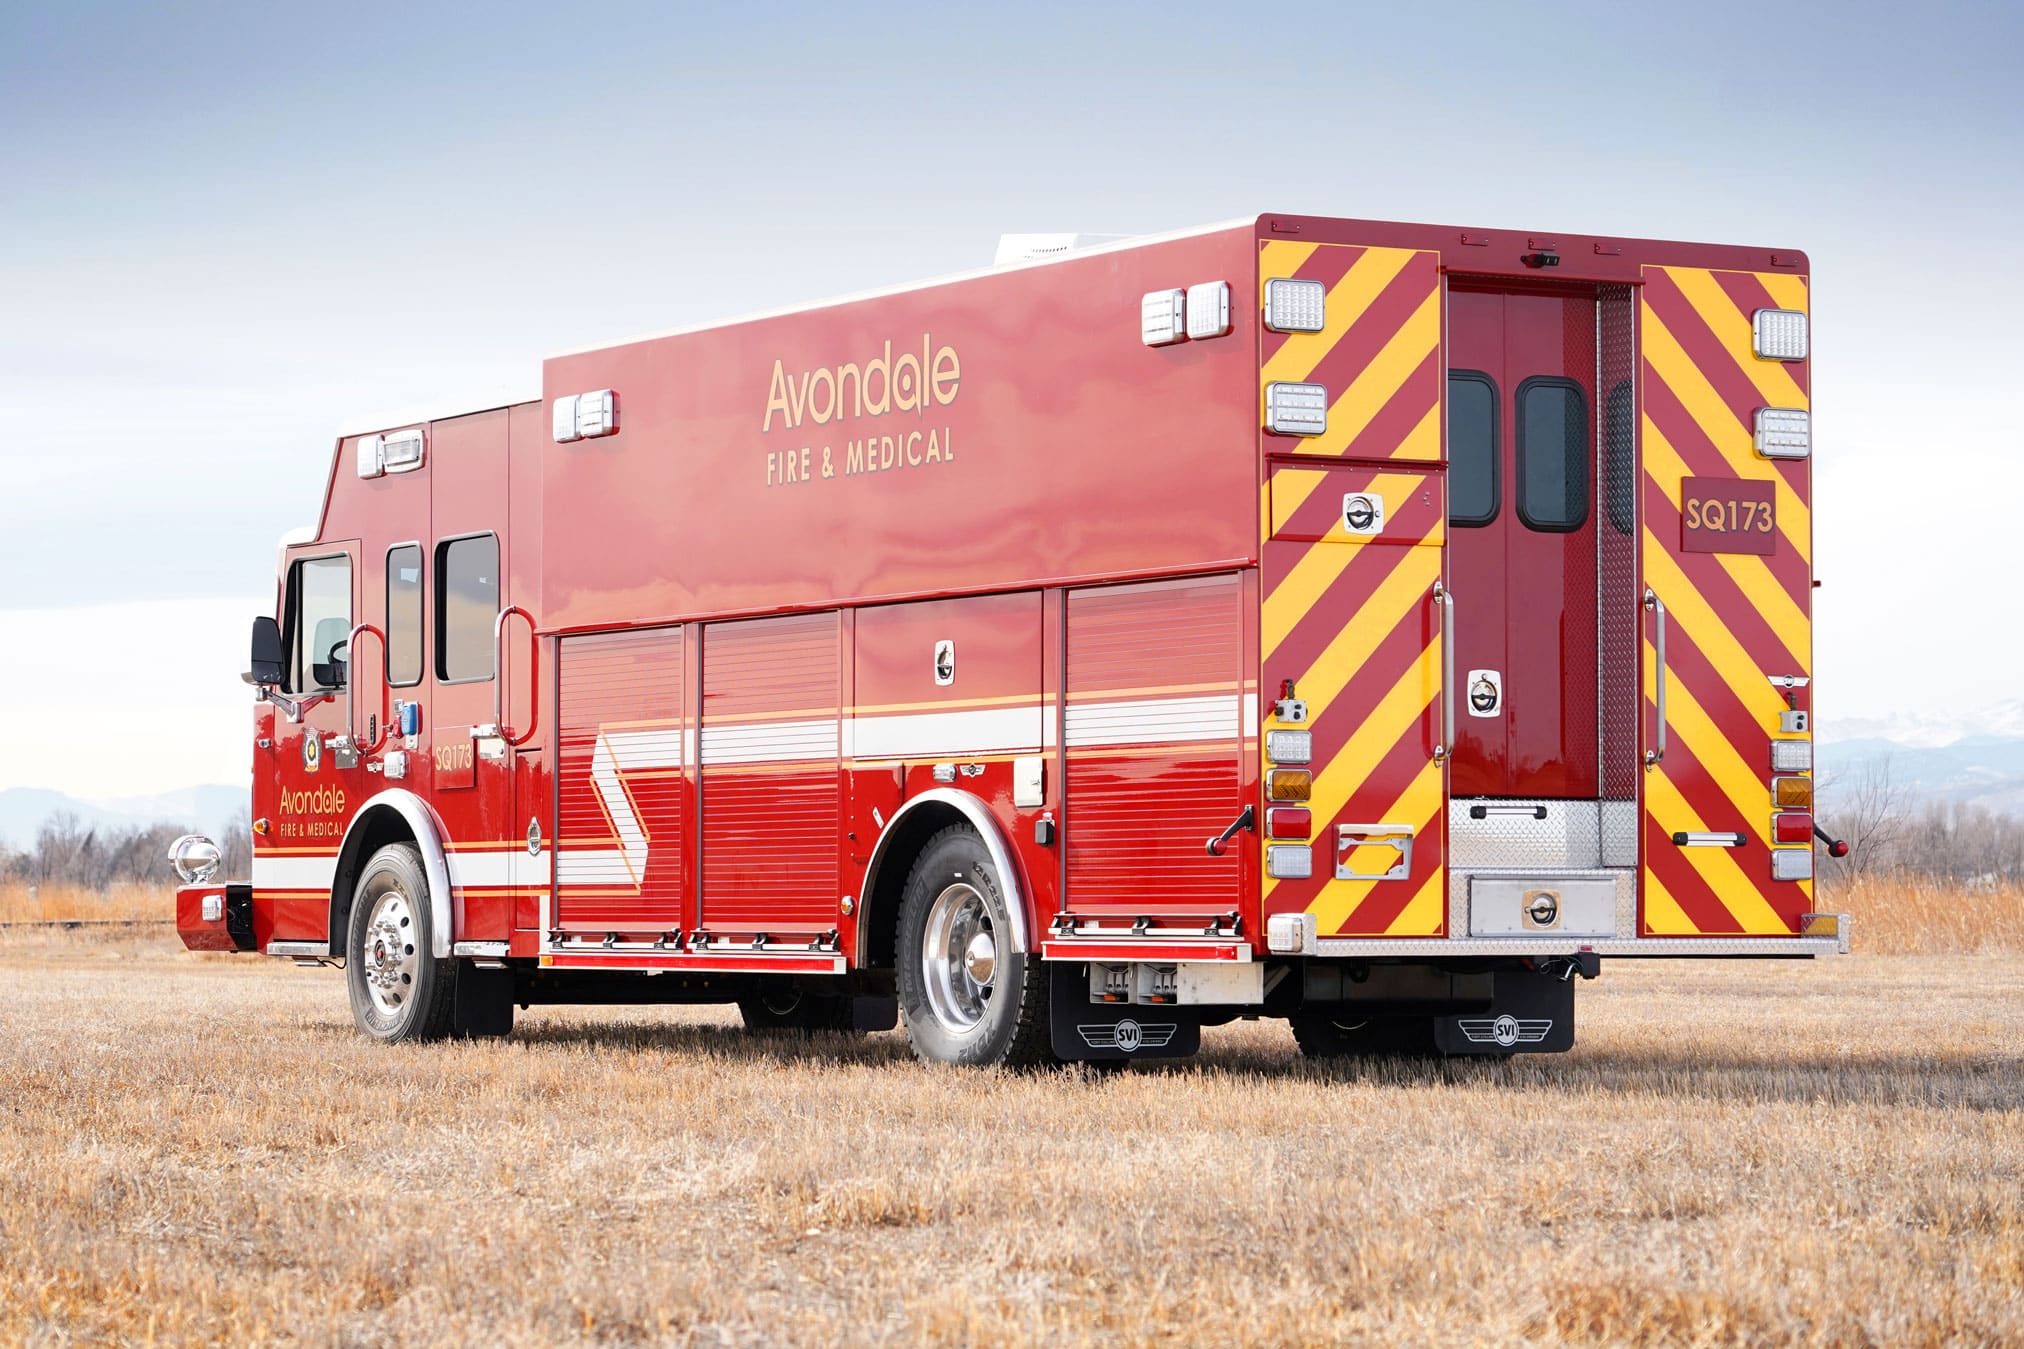 Featured image for “Avondale, AZ Walk-In Rescue #1141”